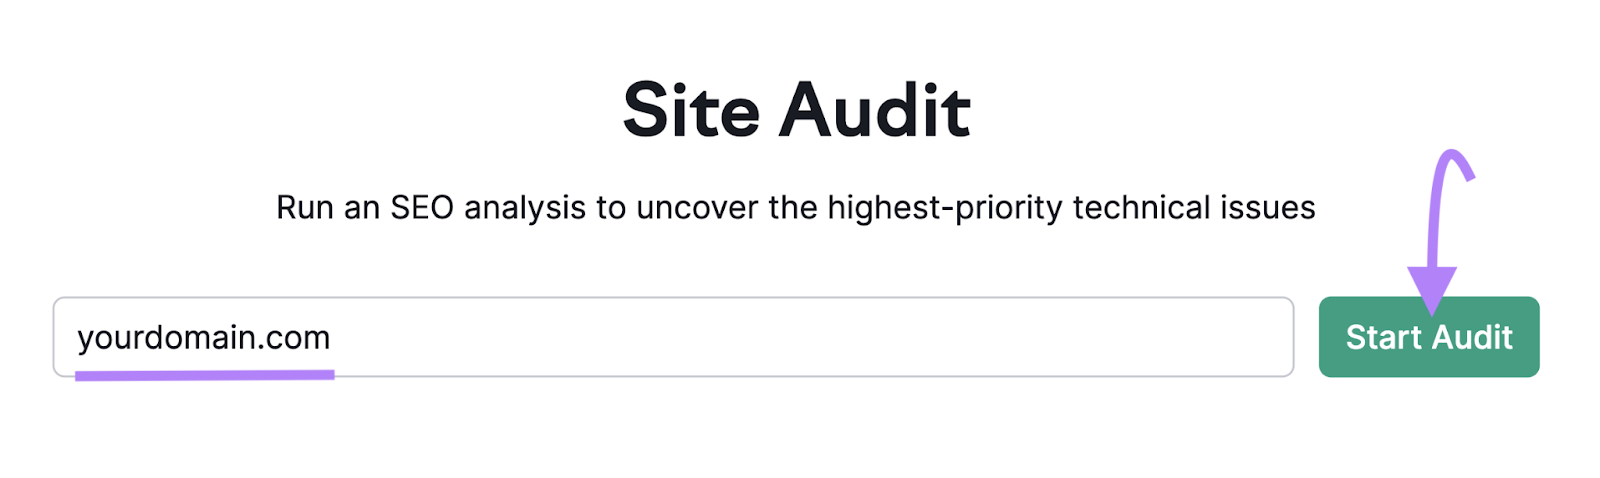 Site Audit search bar with "yourdomain.com" entered.